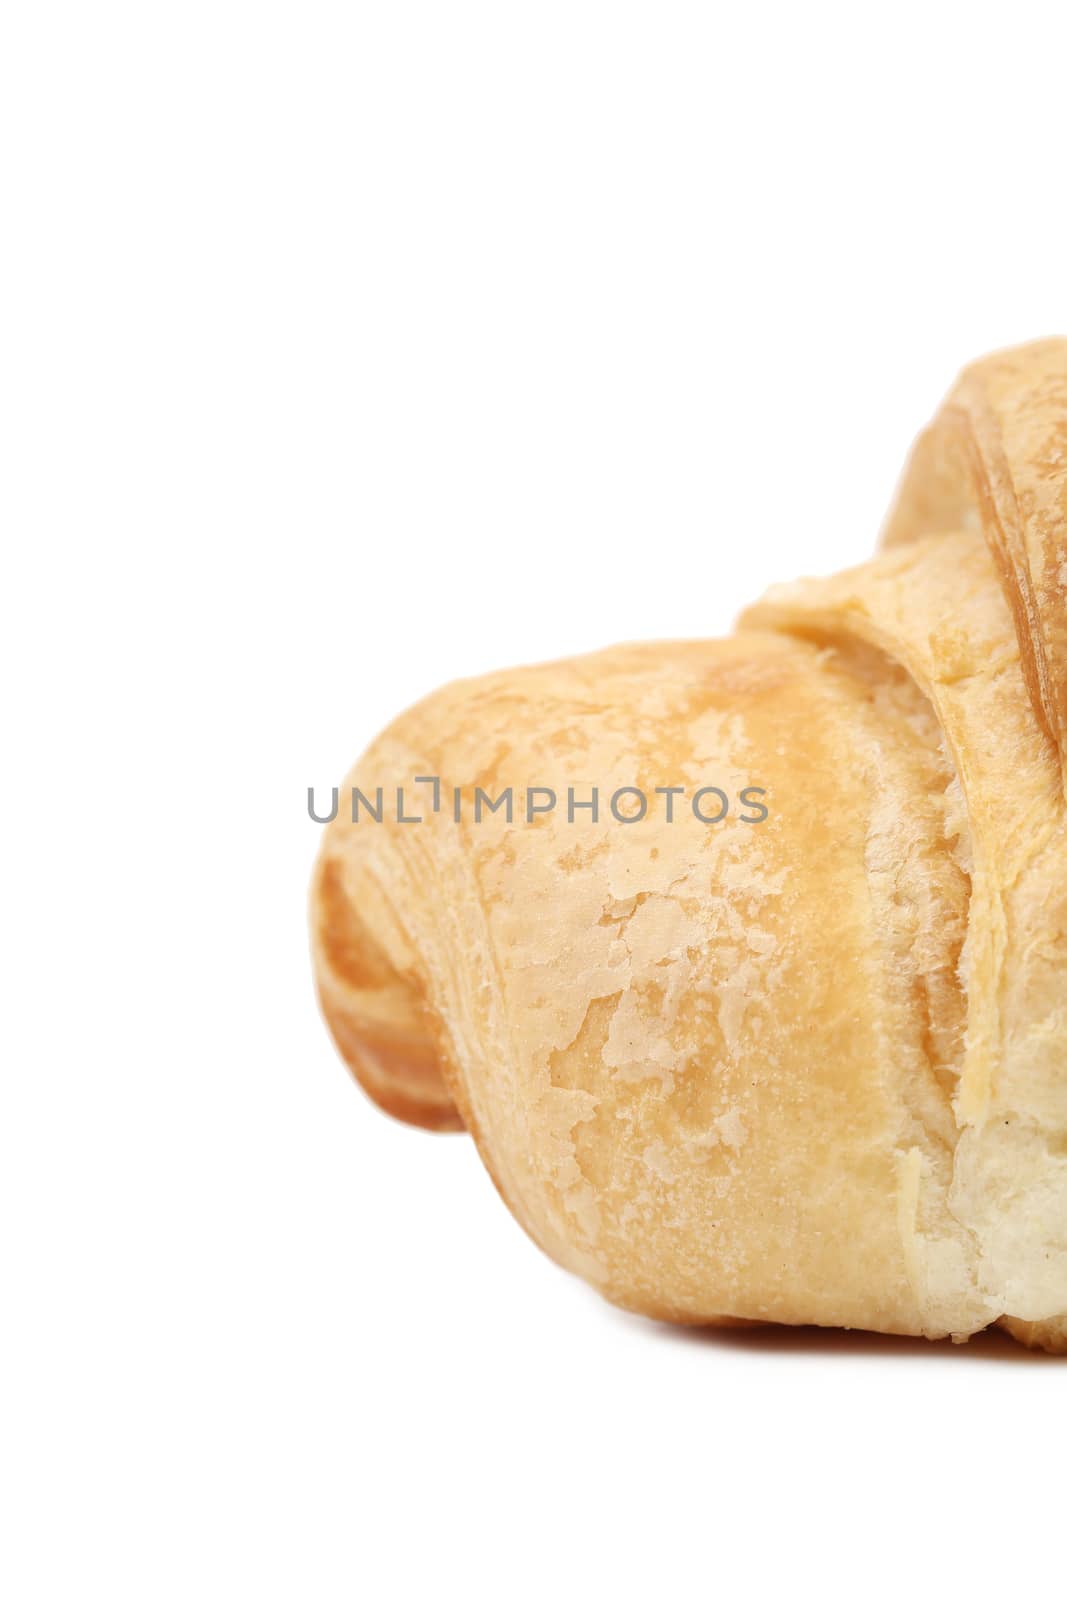 Image of croissant. Close up. Whole background. Place for text.